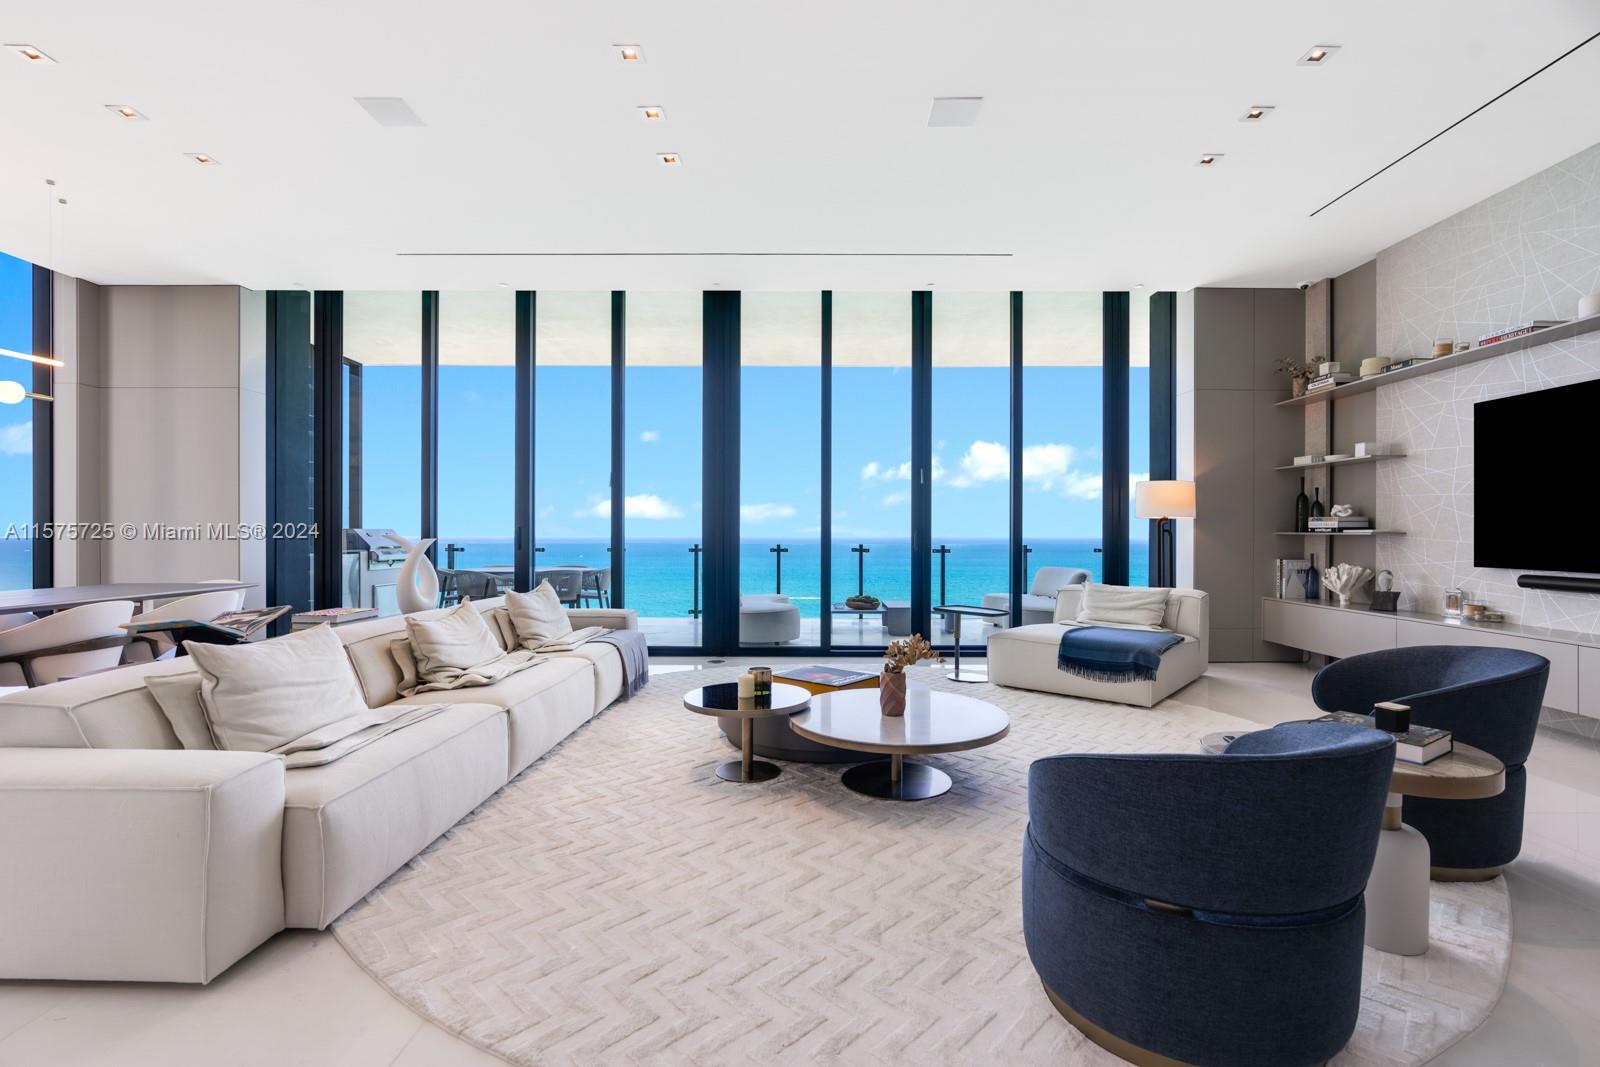 Experience oceanfront luxury living at its finest in this meticulously upgraded premier residence located at Muse Condo, Sunny Isles Beach. This exquisite property offers high-end custom finishes in every detail from the wood paneling to the built-ins and lighting. With 3 bedrooms, 3.5 bathrooms, plus a den with sauna and a cold plunge, the expansive layout provides ample space for relaxation and entertainment. Boasting an open Italian kitchen with top-of-the-line appliances and marble floors throughout. Indulge in the ultimate resort-style lifestyle with access to 5-star amenities, all within a prestigious oceanfront setting. Enjoy breathtaking direct ocean views from the comfort of your home. Available furnished or unfurnished.